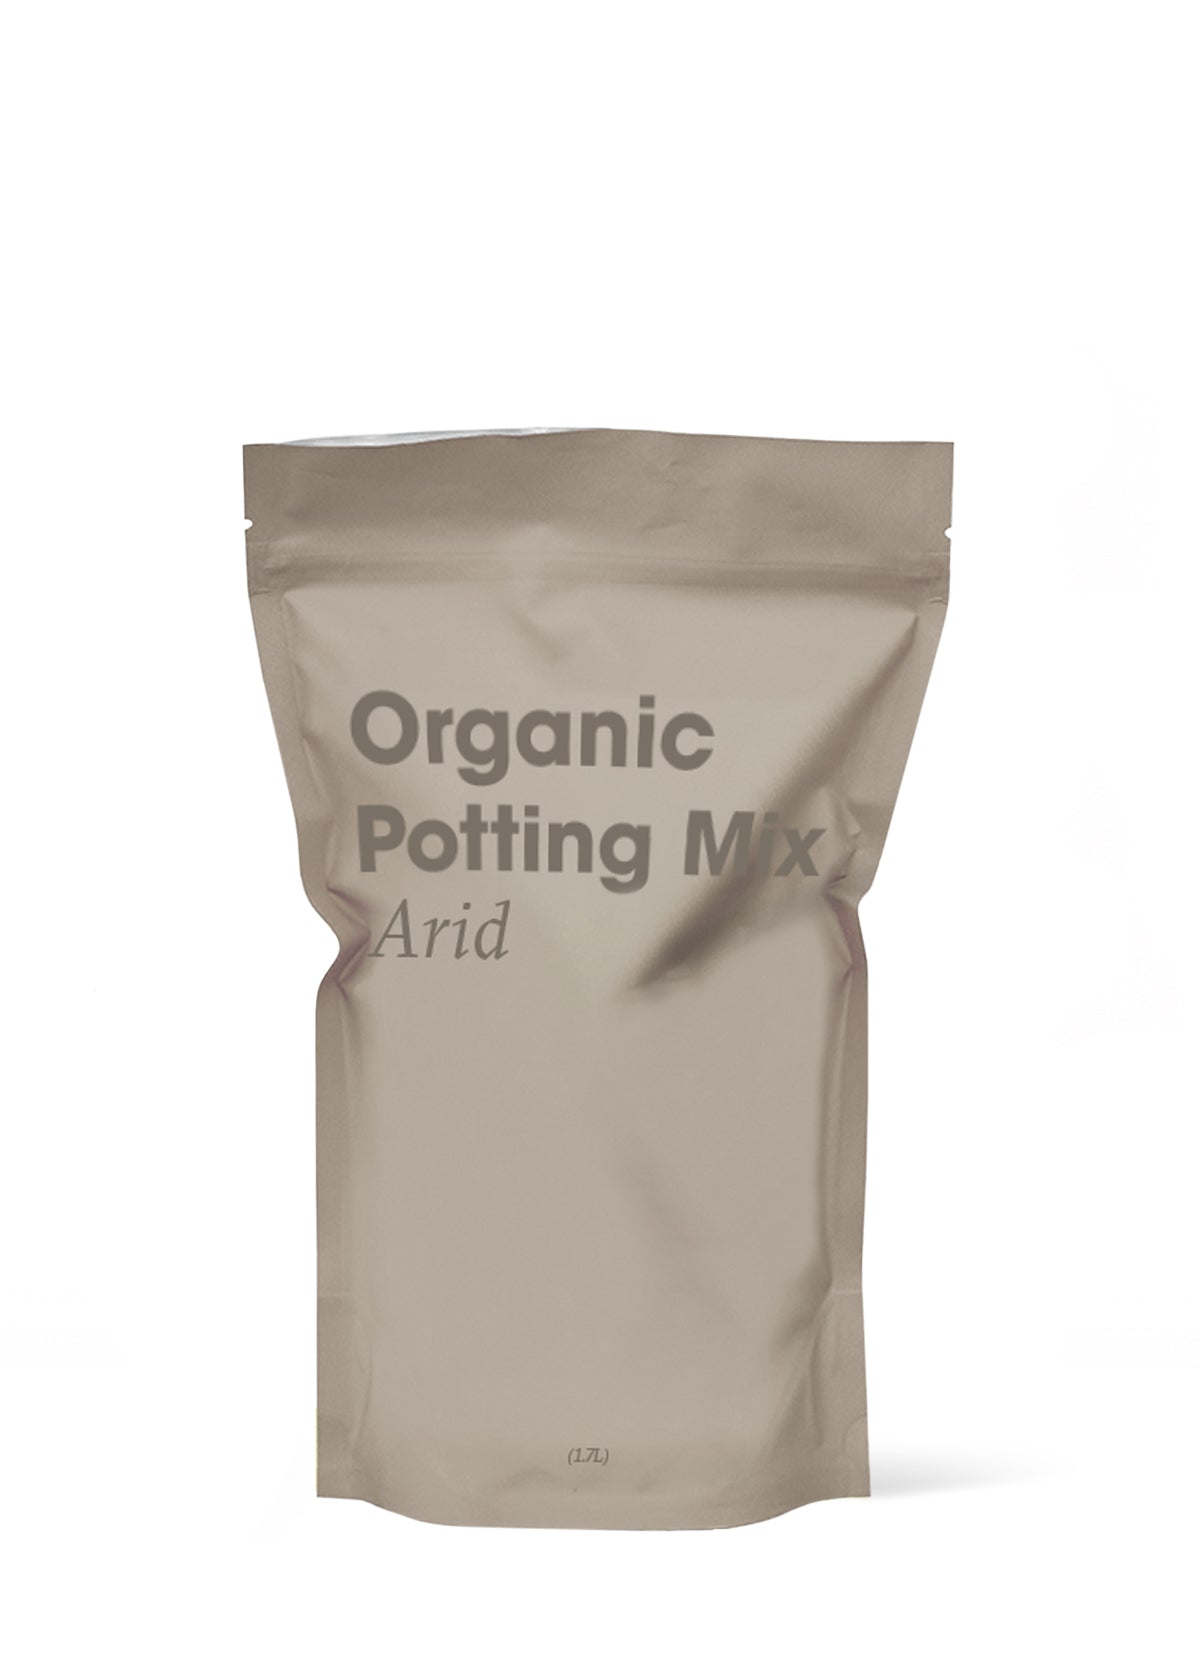 Organic Potting Mix for Arid Plants in a brown bag with a white background